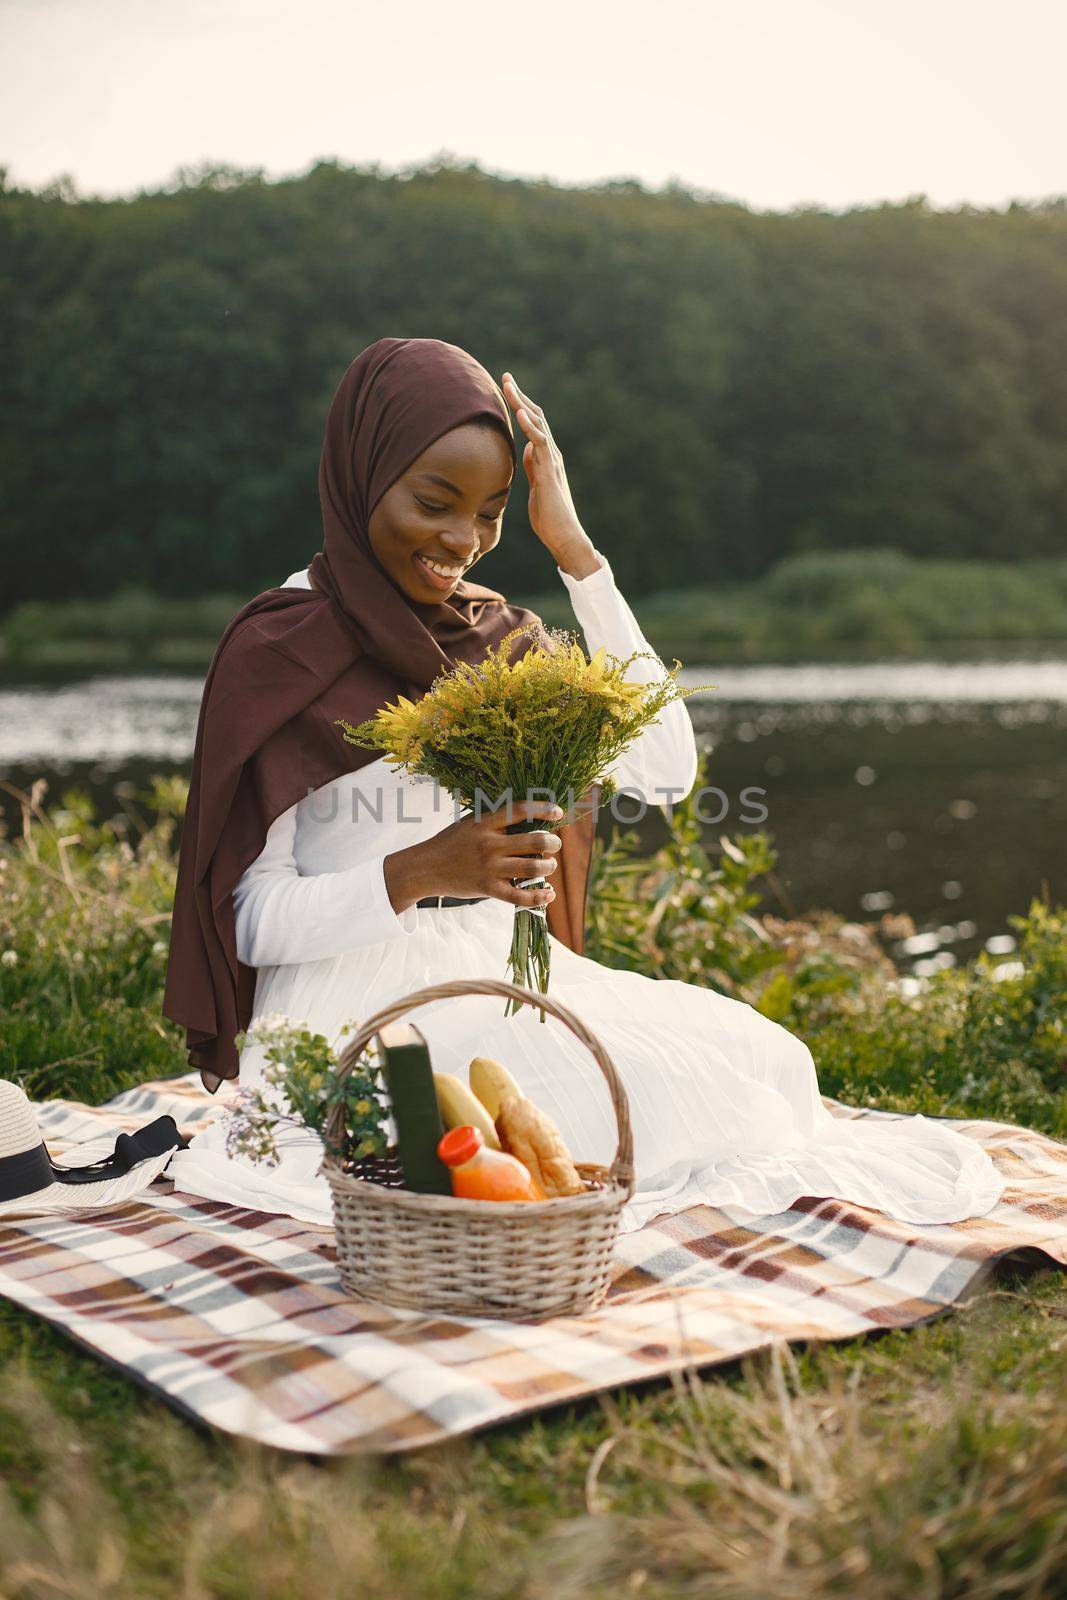 Muslim girl in hijab sits next to a basket with a picnic food holding a bouquet of flowers. Portrait of a Muslim lady in a brown hijab on the plaid picnic blanket near the river. Girl wearing white clothes and looking at camera.